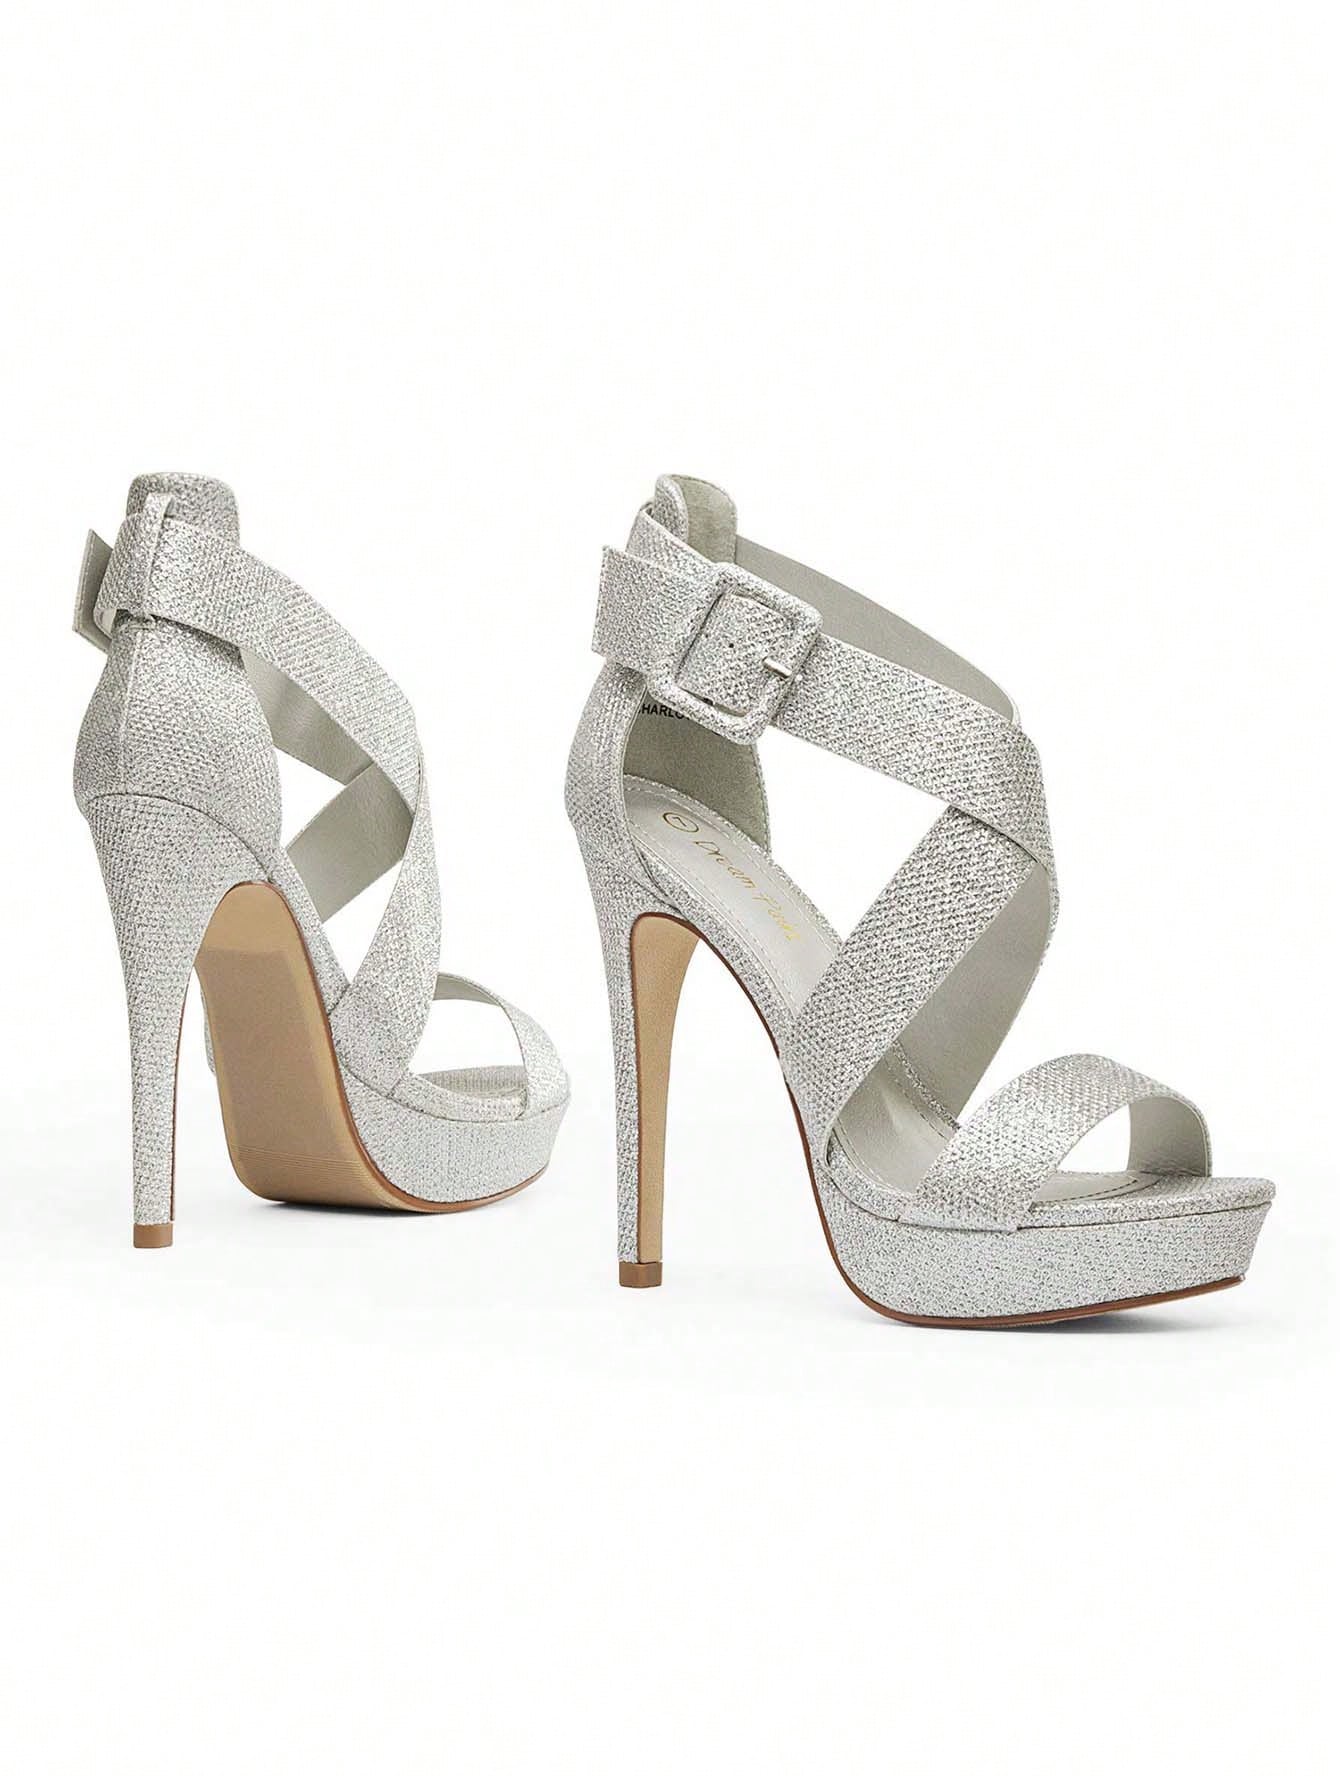 Fabulous Cross-Strap High Heel Sandals: Elevate Your Style and Confidence with These Stunning Platform Heels